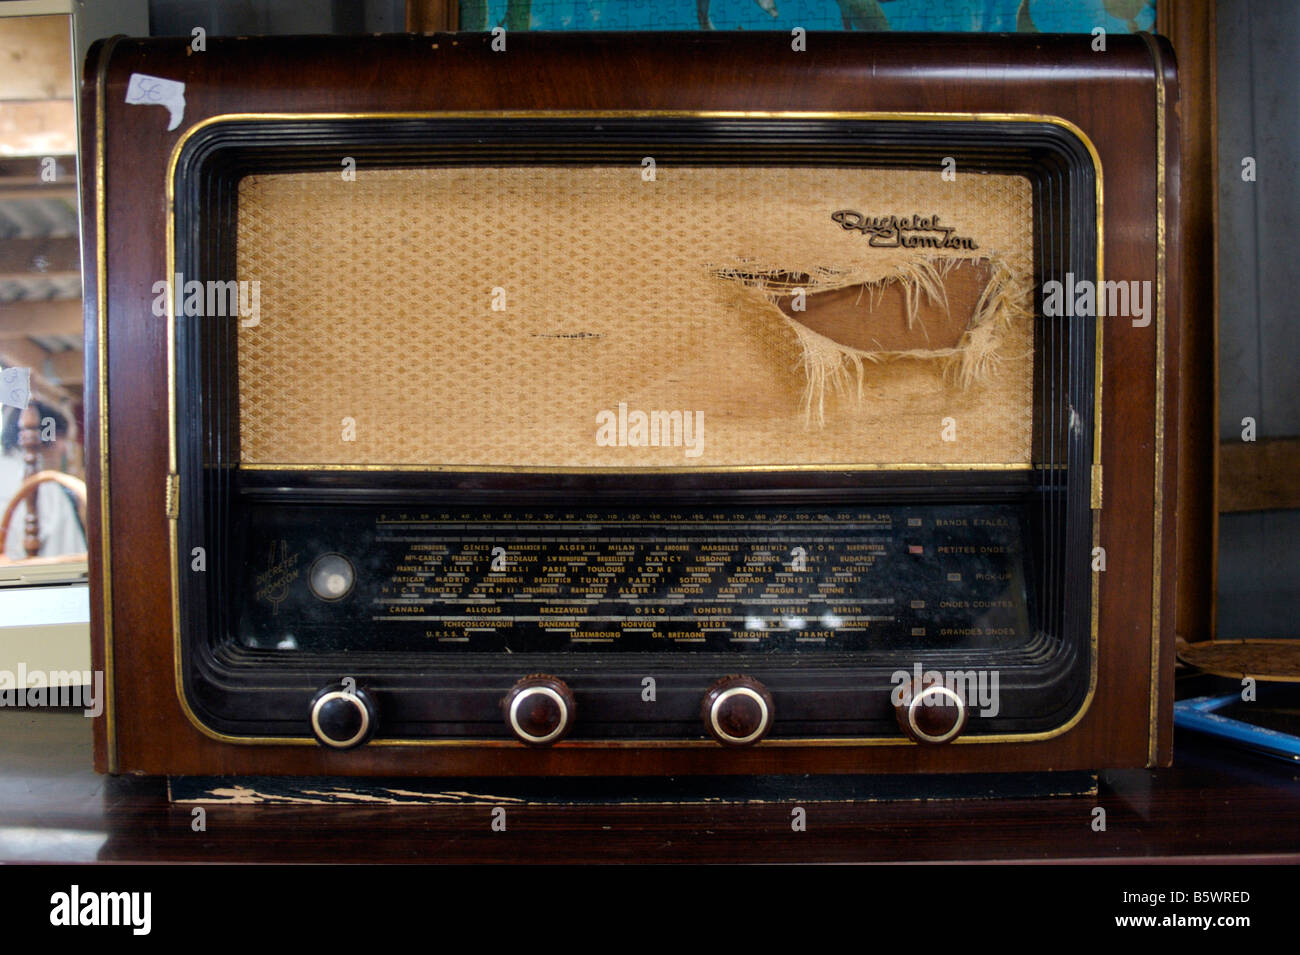 Old French Radio High Resolution Stock Photography and Images - Alamy